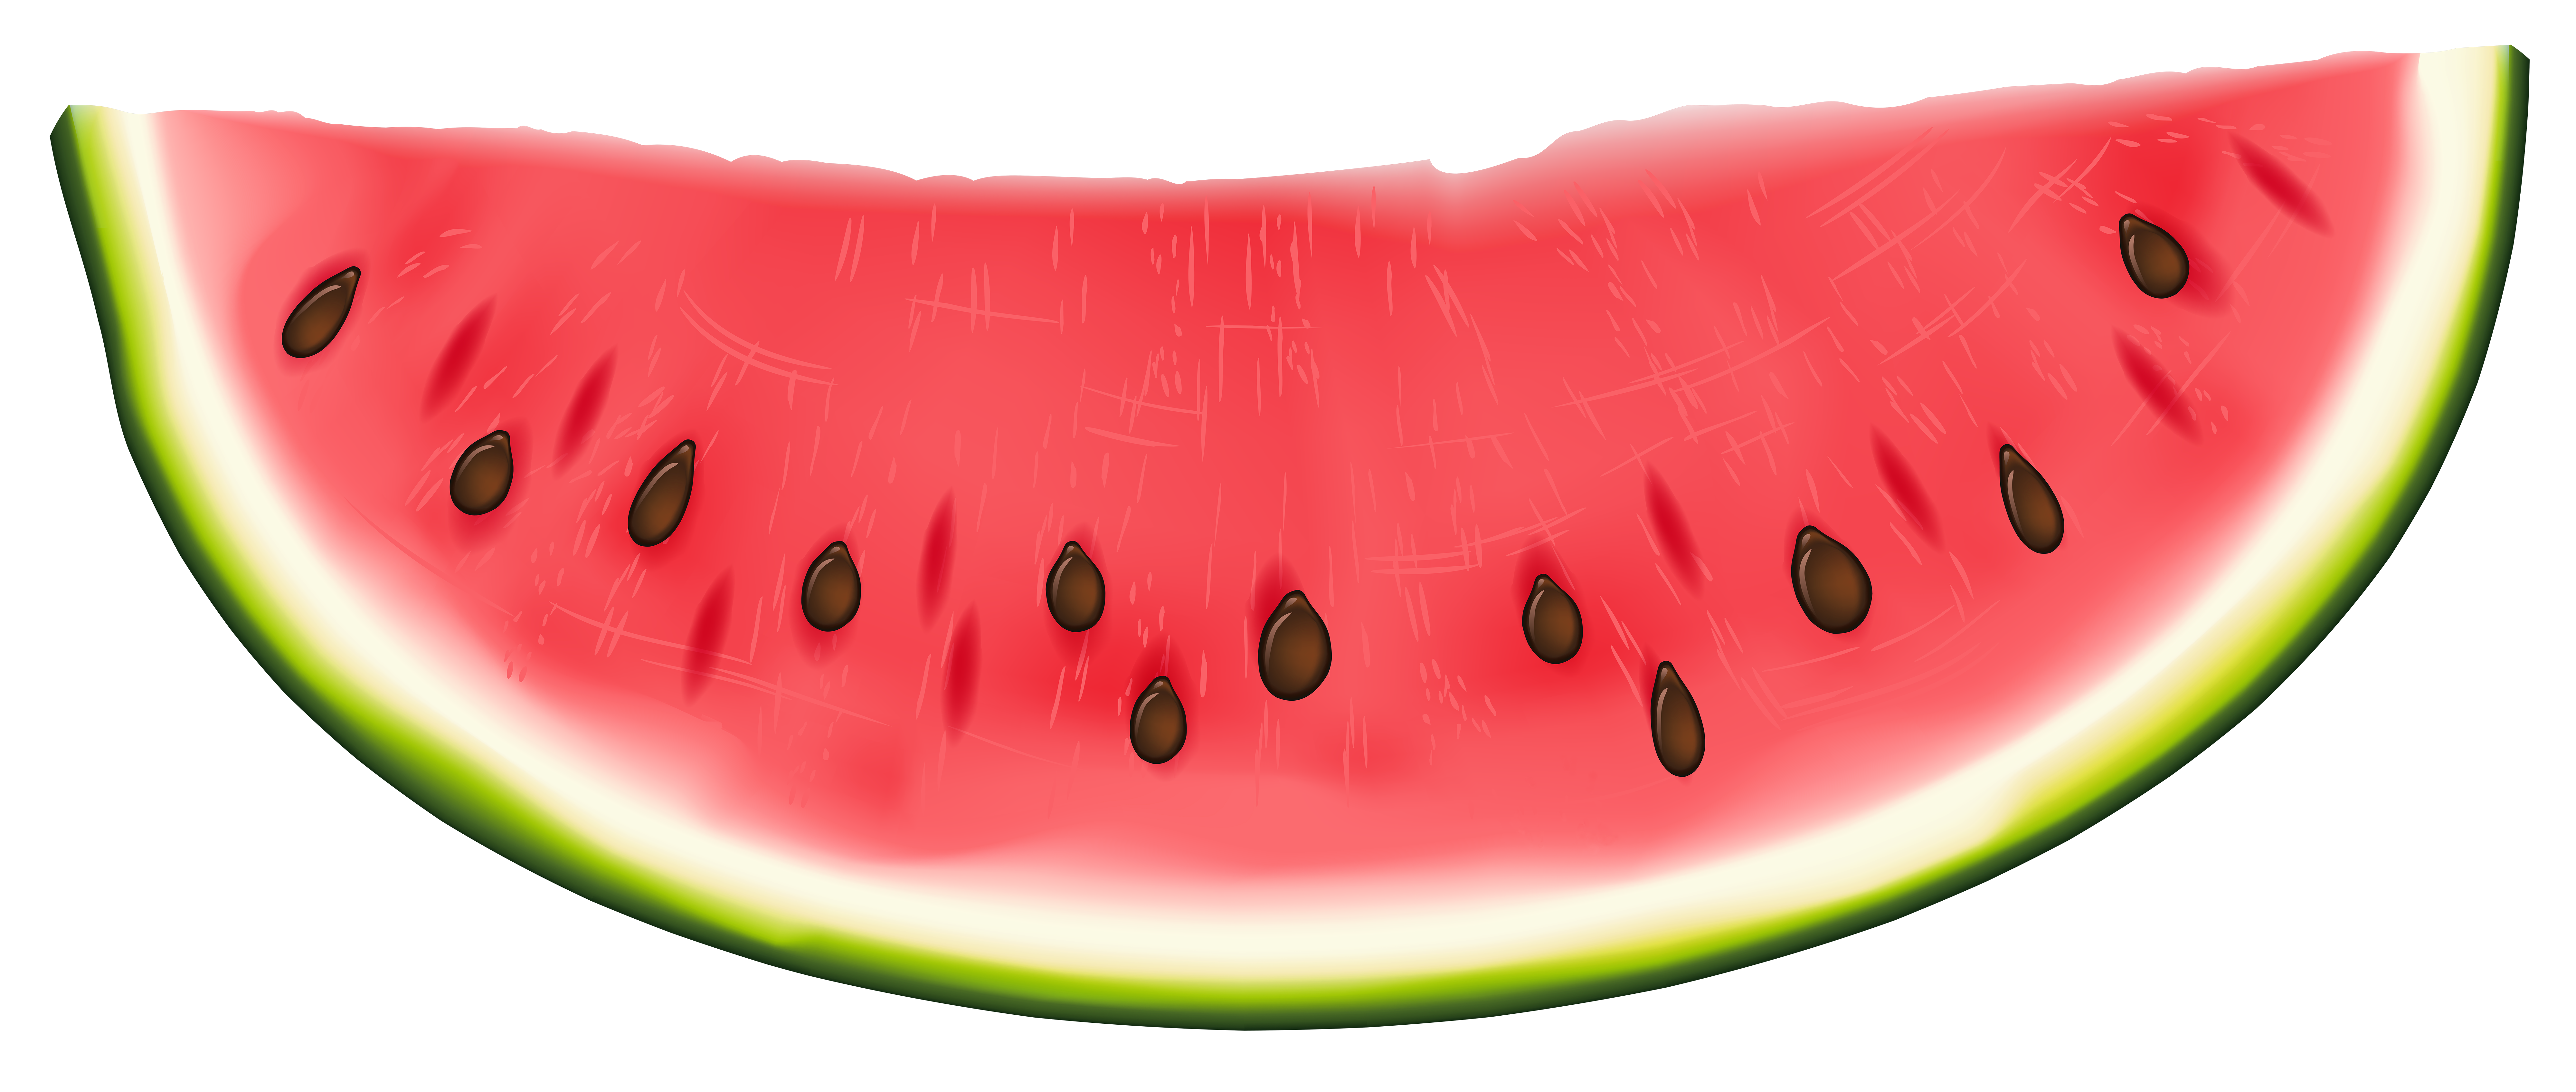 0 Result Images of Watermelon Png Clipart - PNG Image Collection